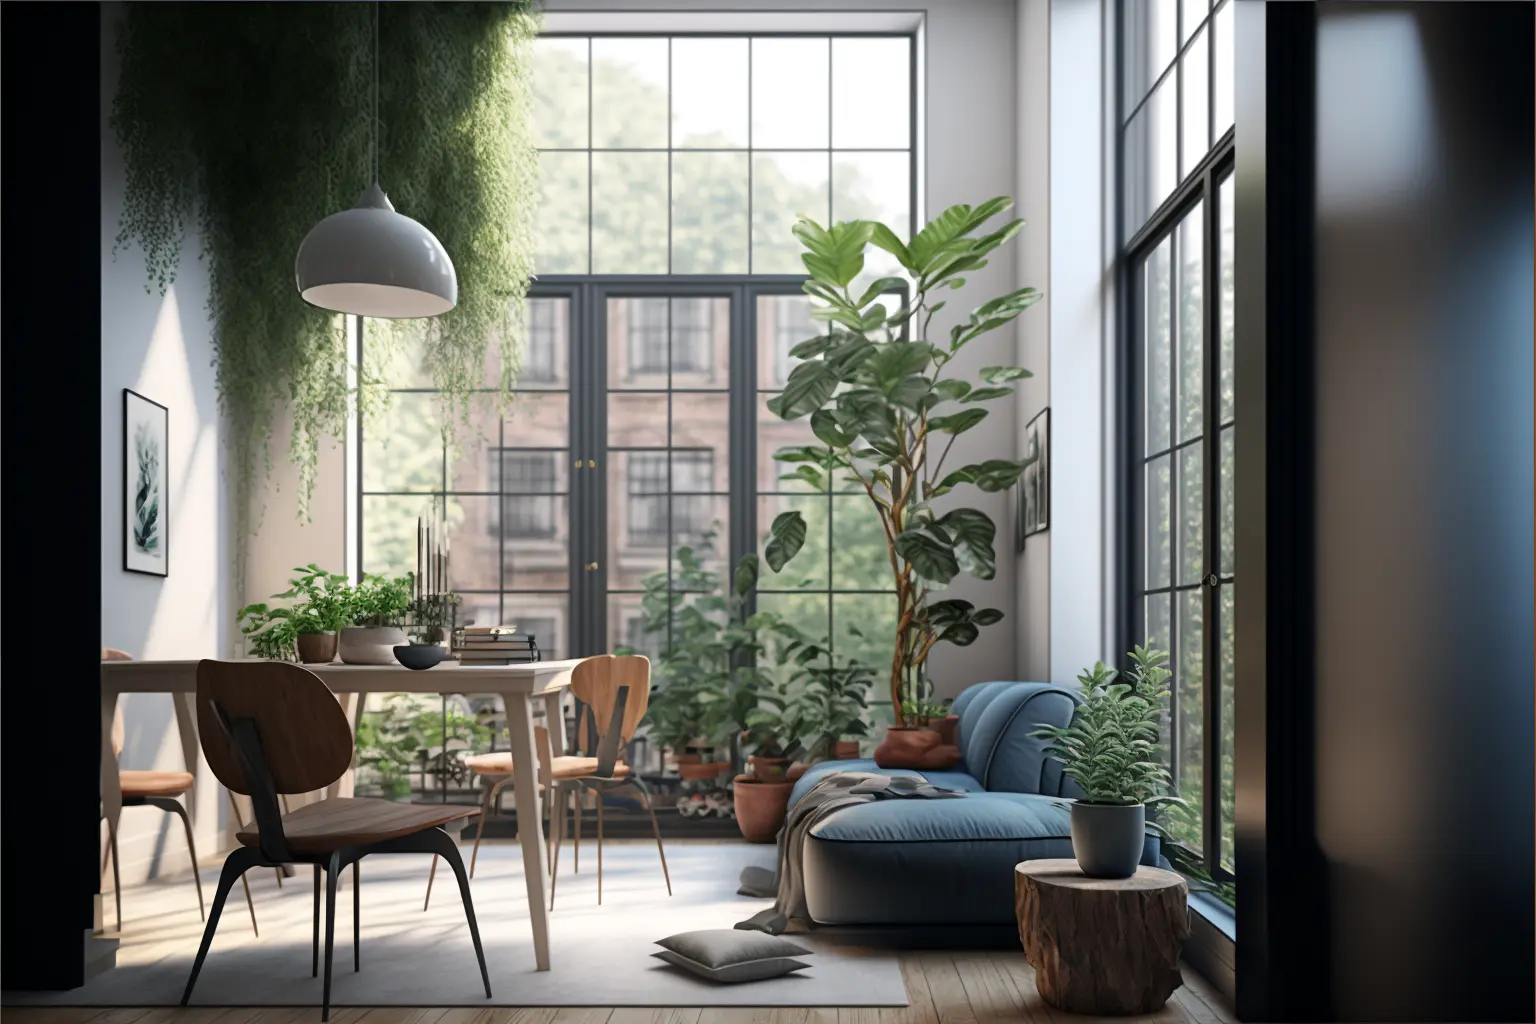 Interior Design, a perspective of of a study, modernist, large windows with natural light, Light colors, plants, modern furniture, modern interior design